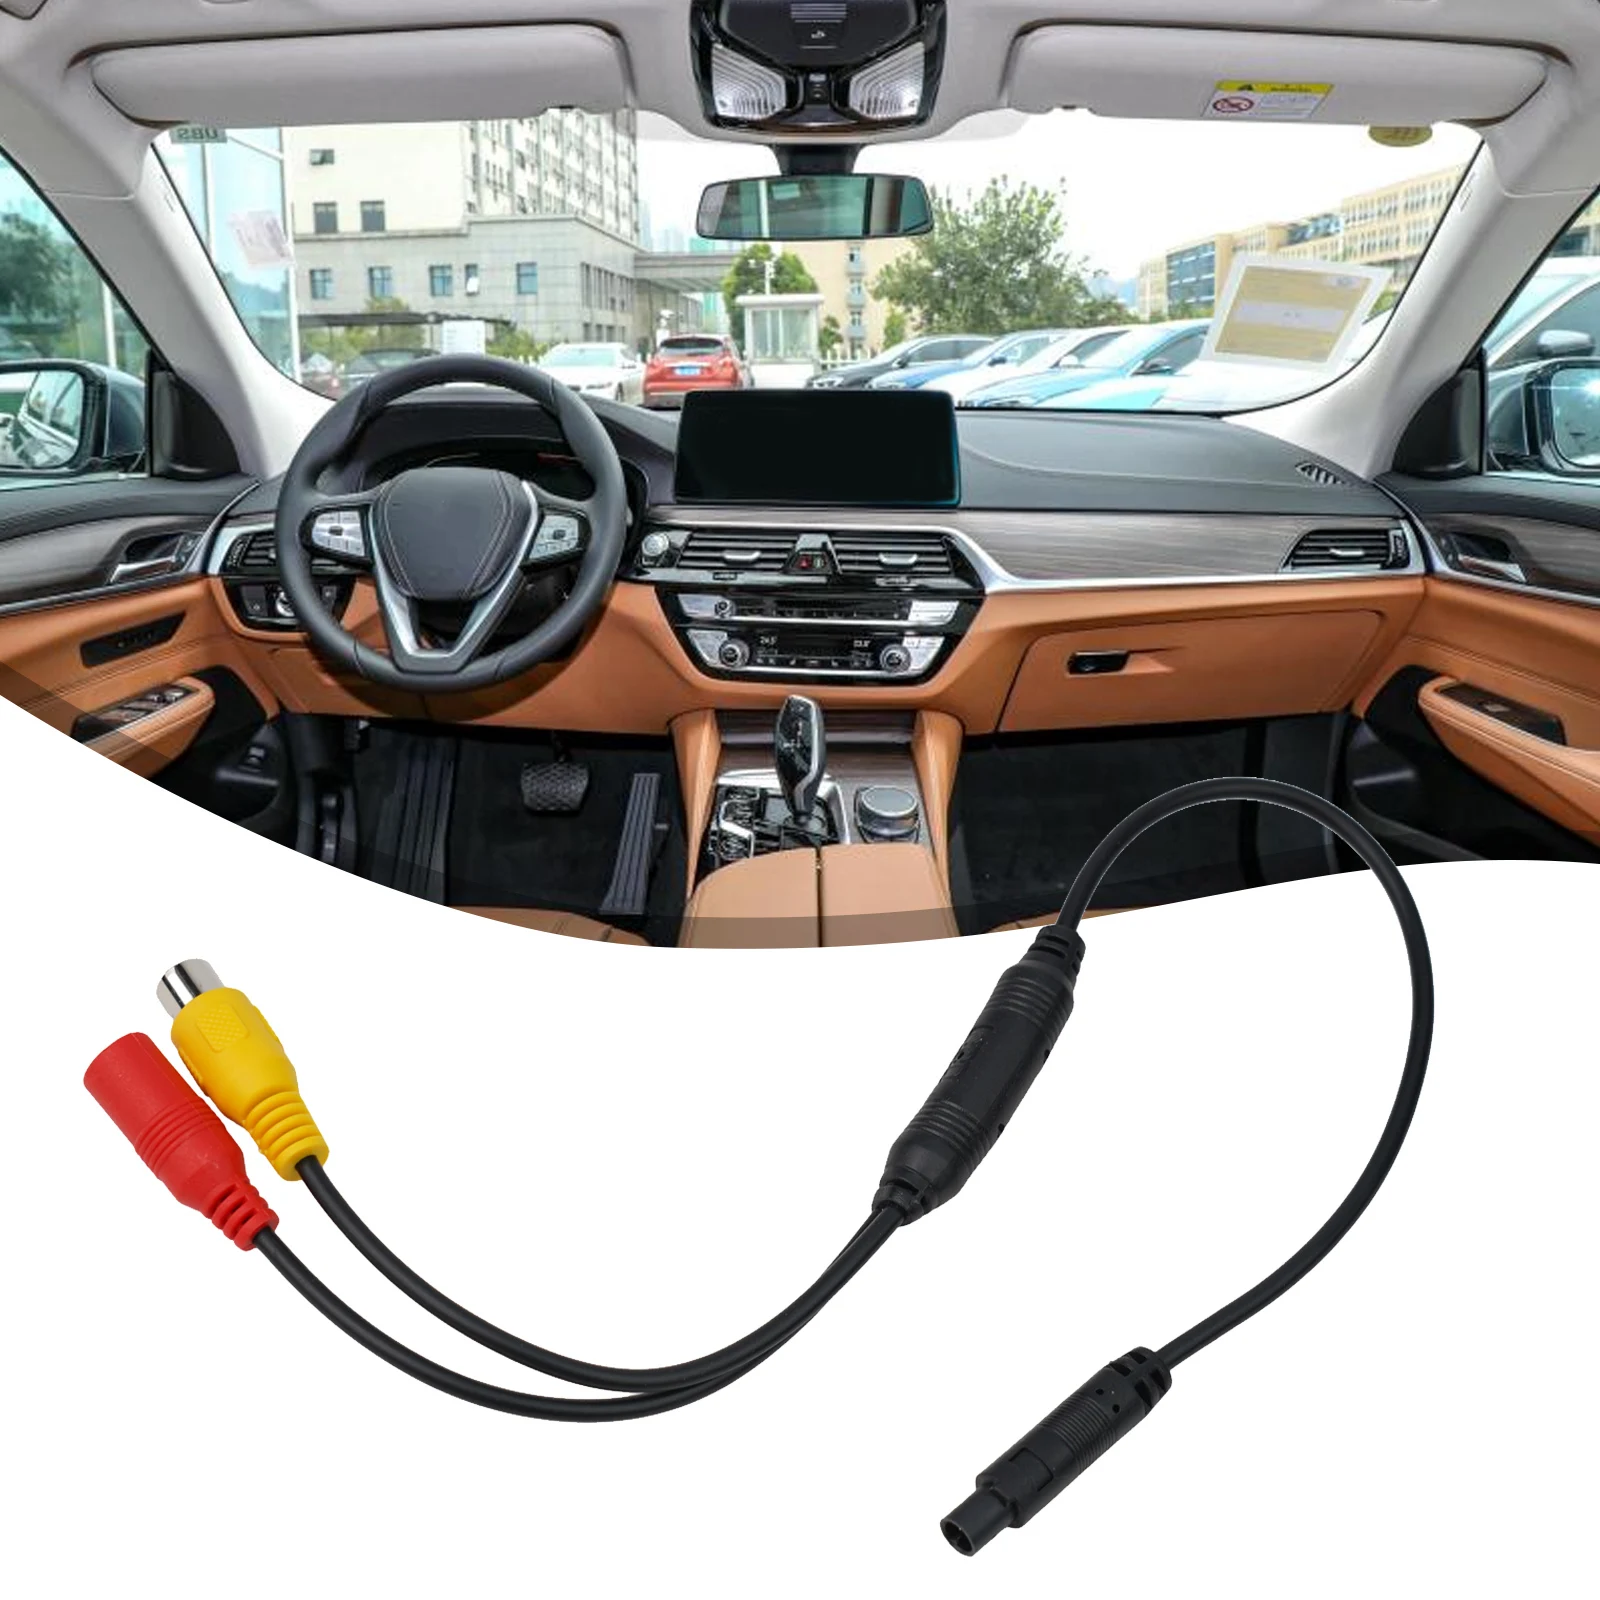 

1xUniversal Camera Signal Harness Car RCA CVBS Male To 4-PIN Female Conversion Cable For Rear View Mirror DVR 50cm DC 12V Wire